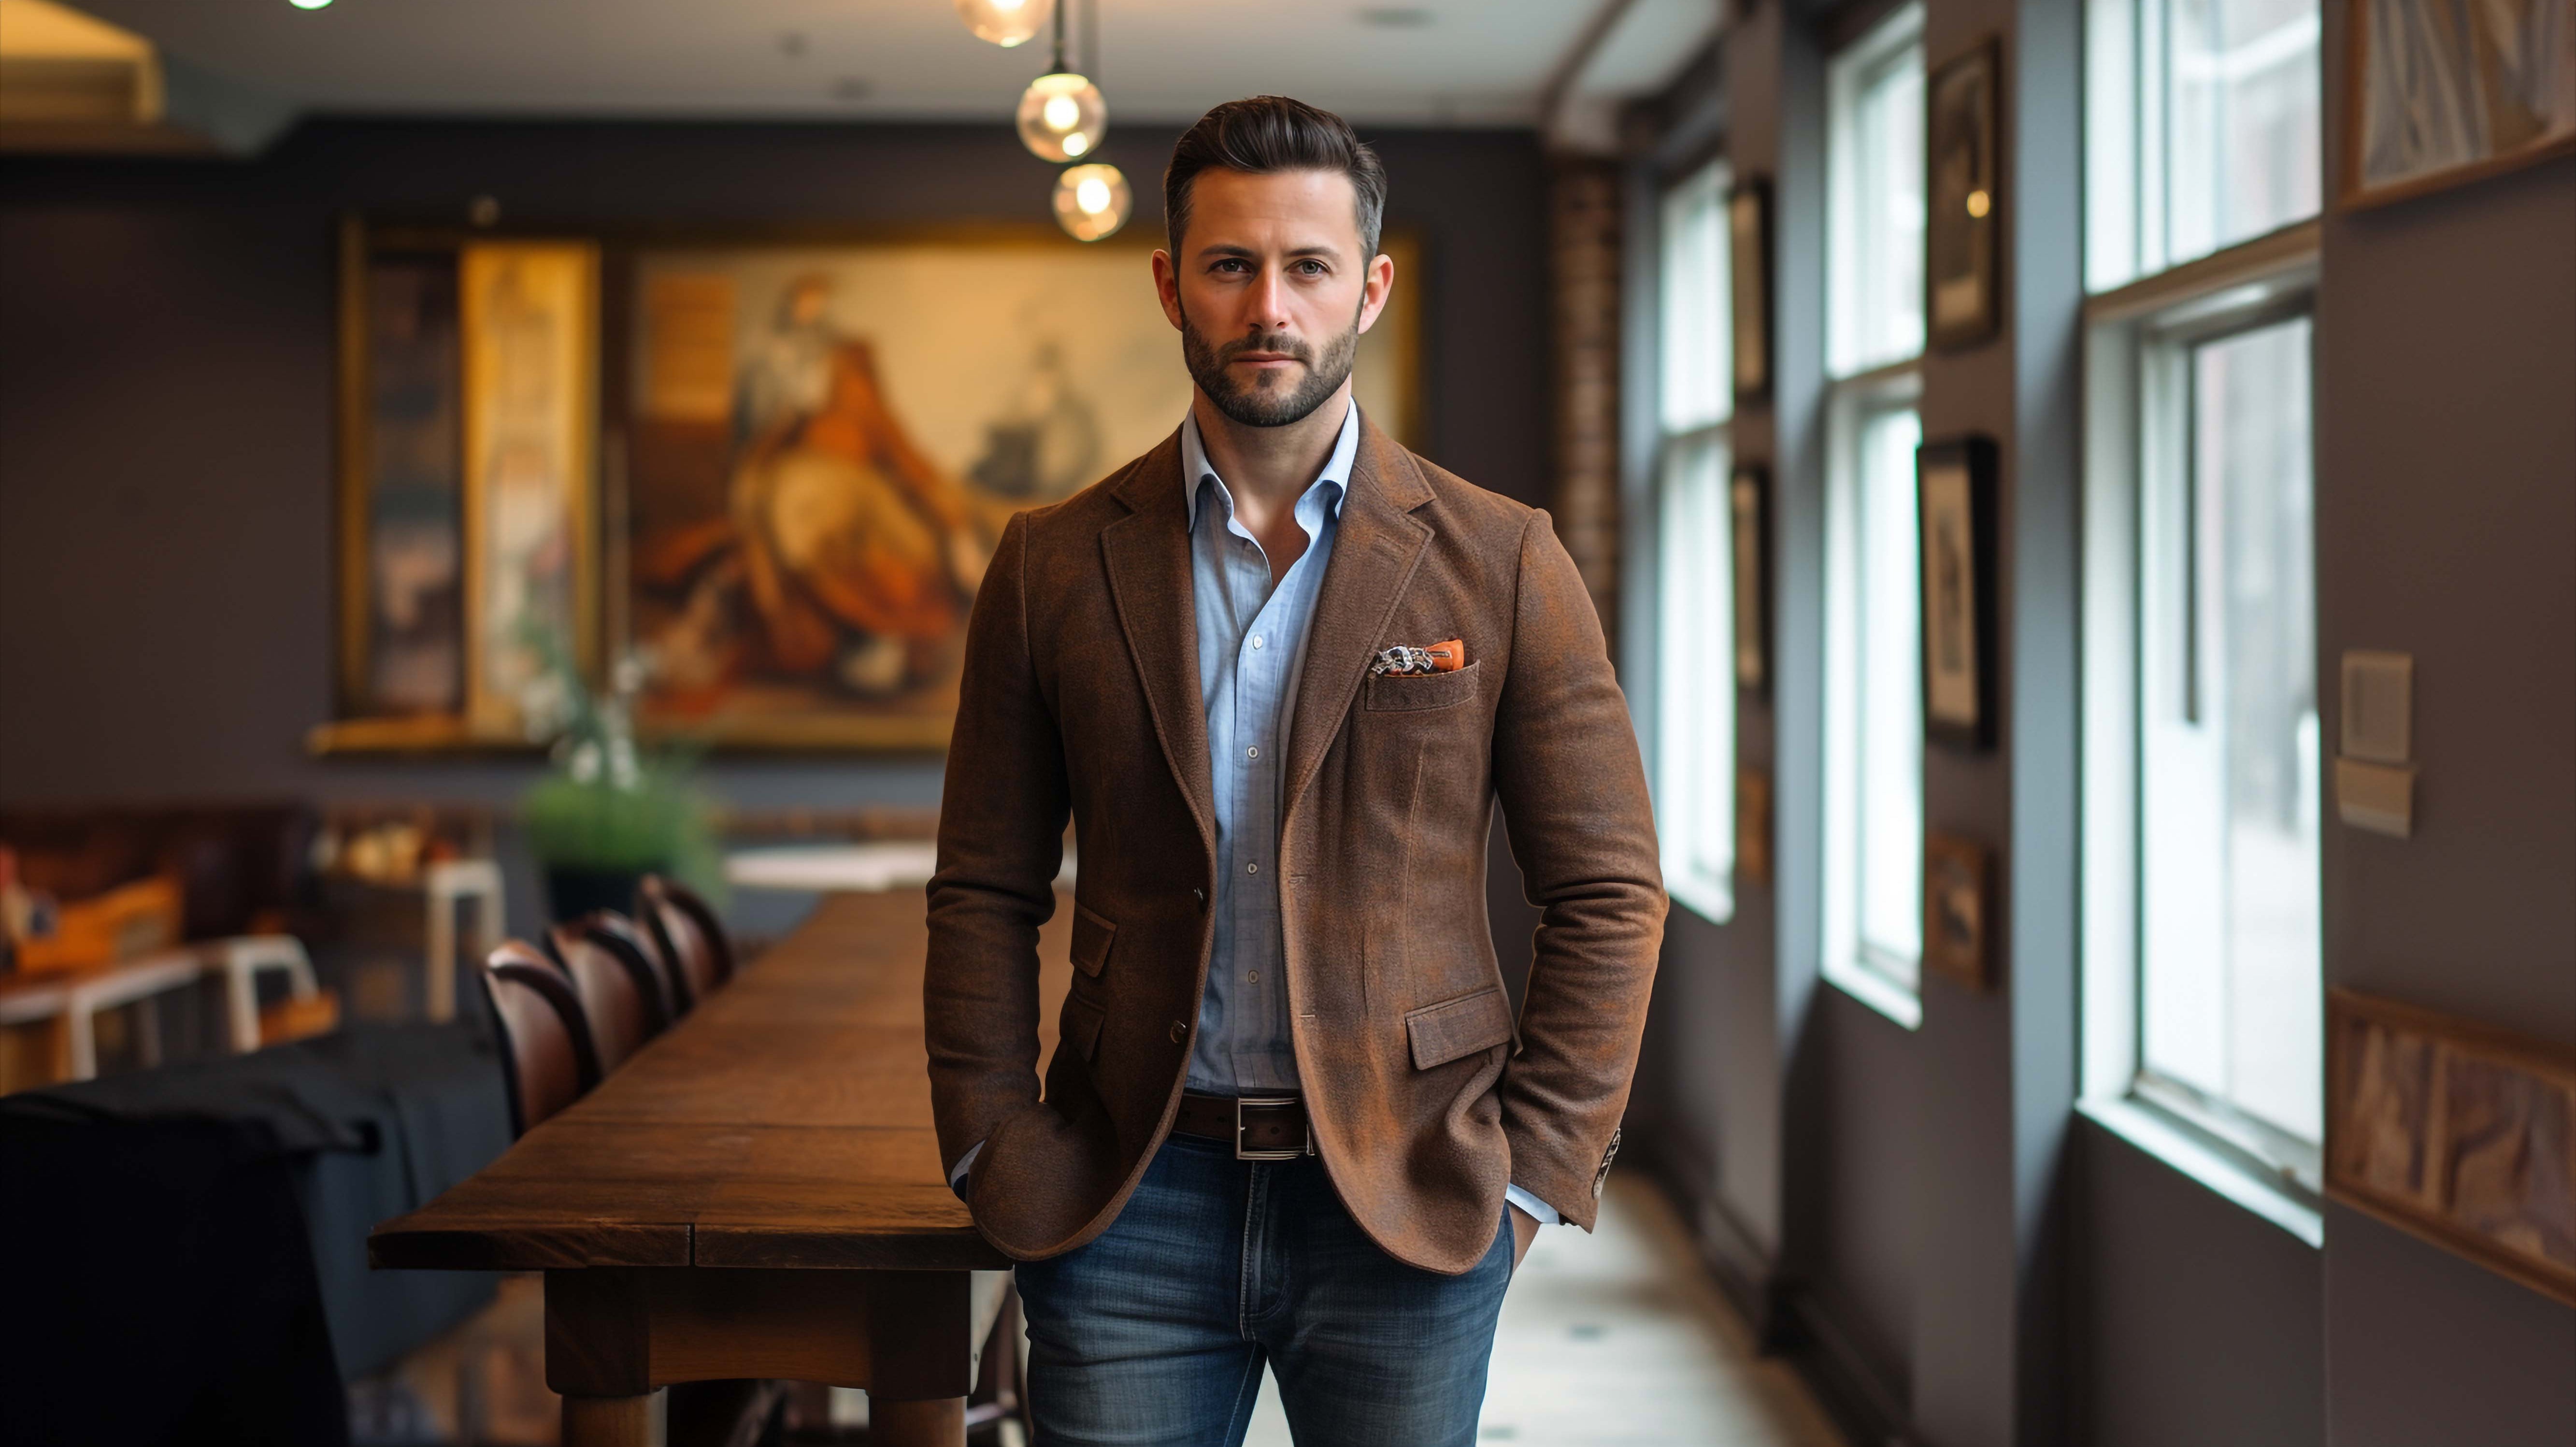 Stylish man showcasing Westwood Hart's tailored brown sport coat paired with jeans and a light blue shirt, exemplifying contemporary workwear and garment choices.